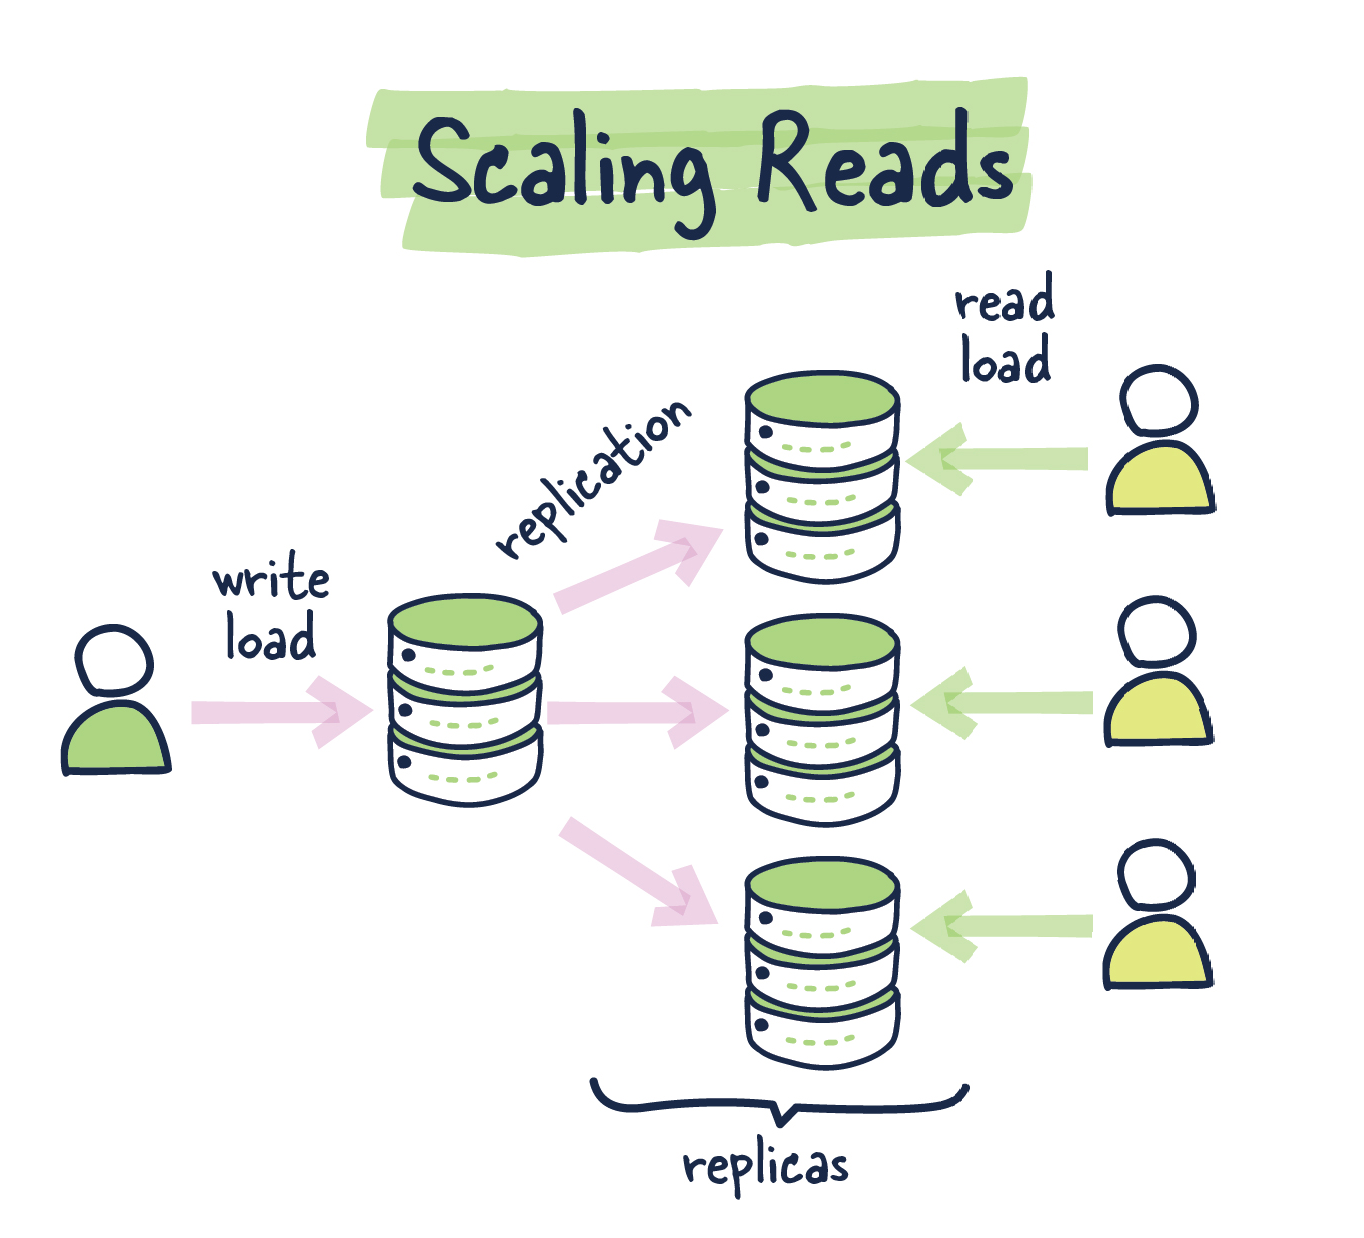 Scaling Reads